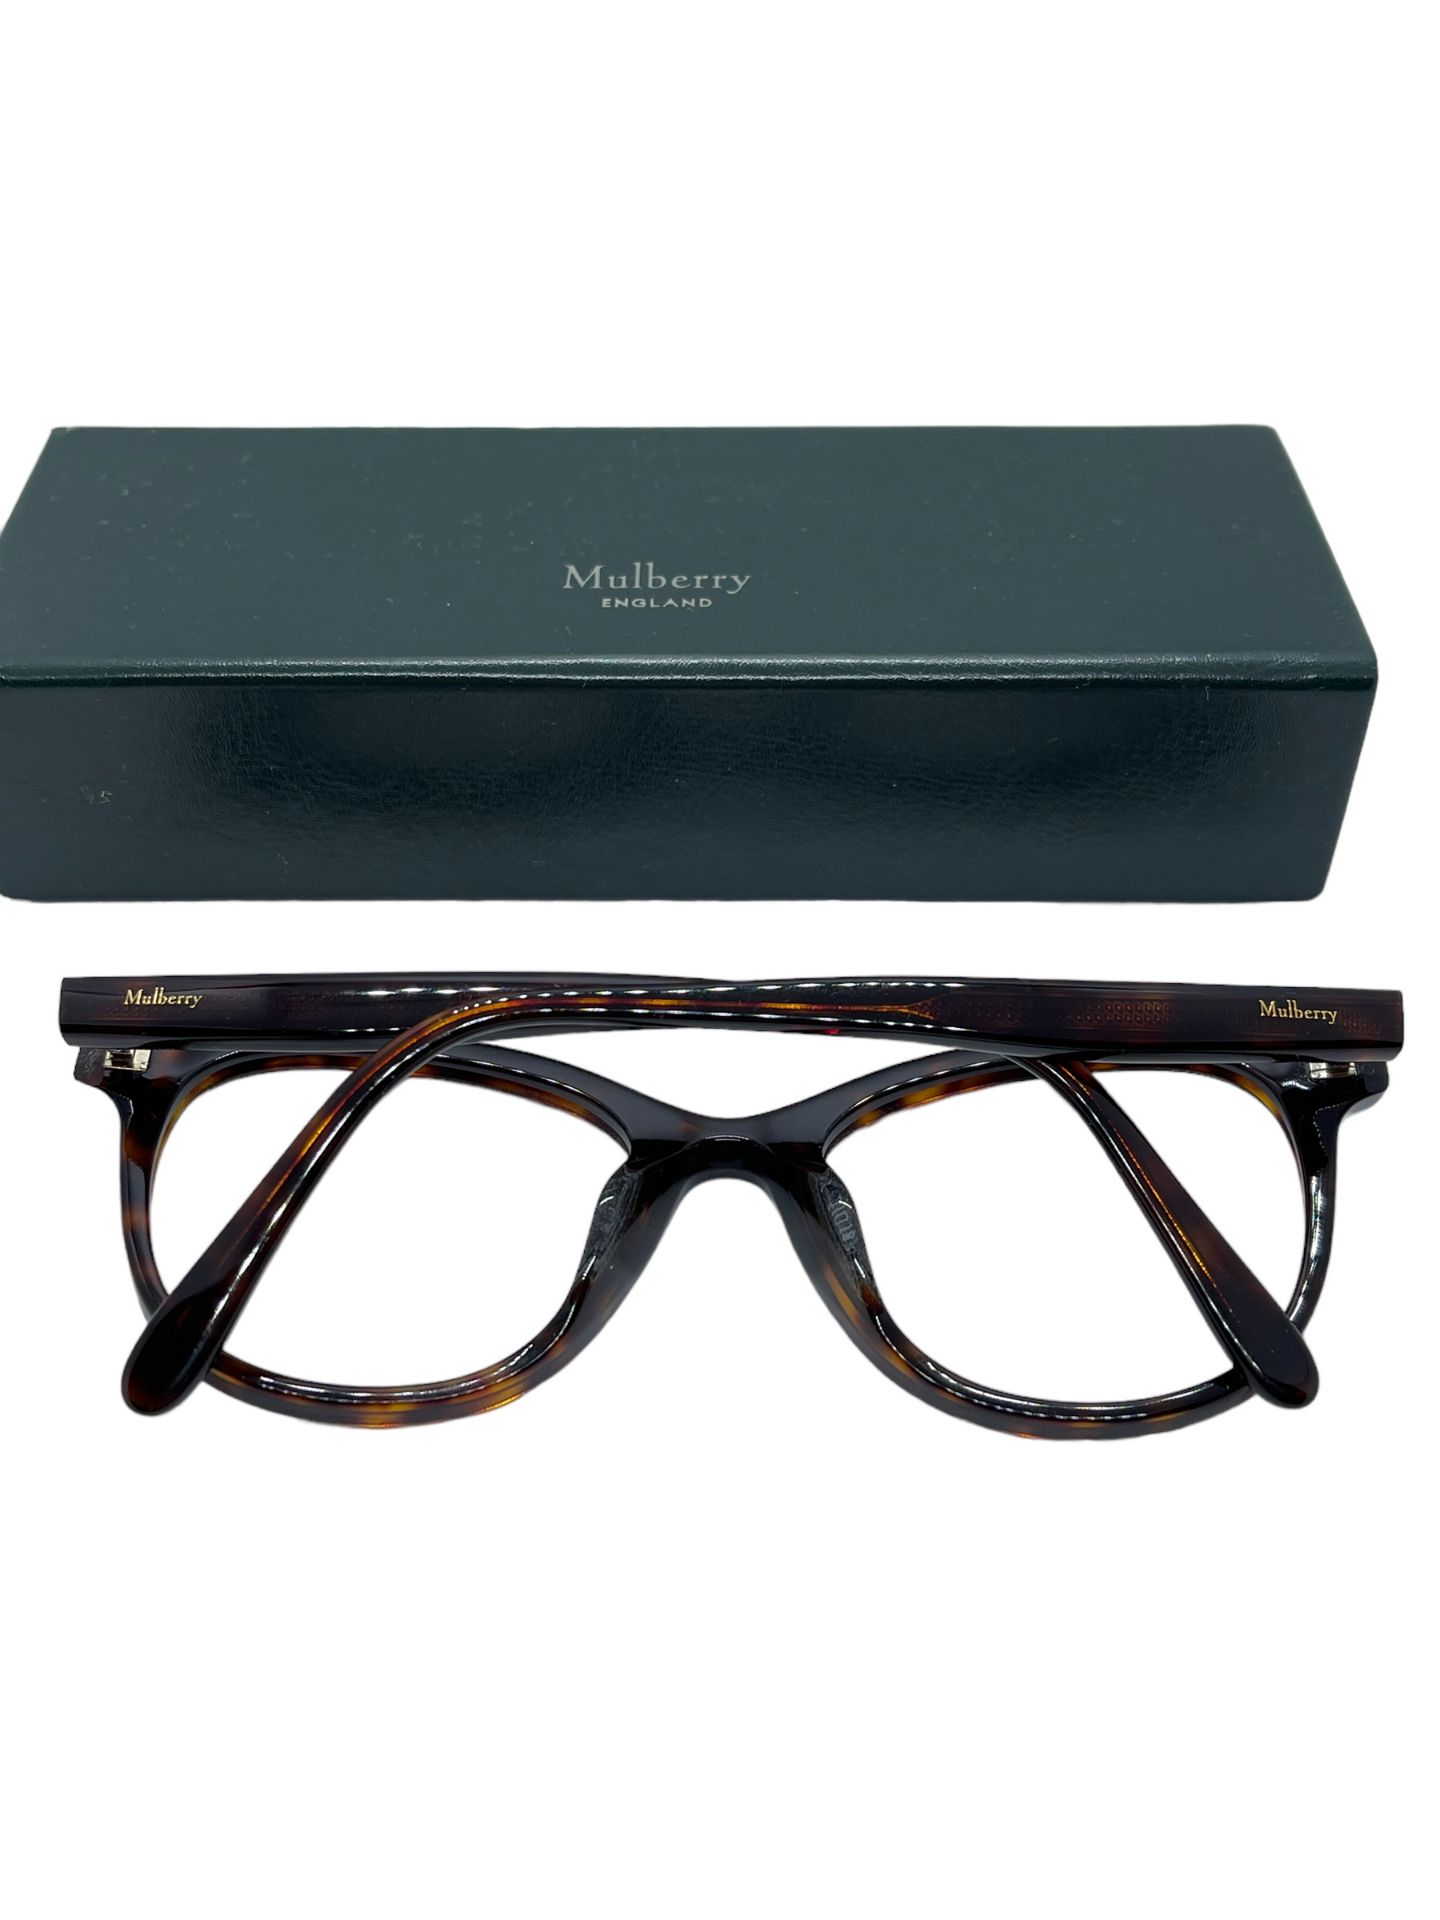 Mulberry Specticals xdemo boxed case unisex - Image 5 of 6